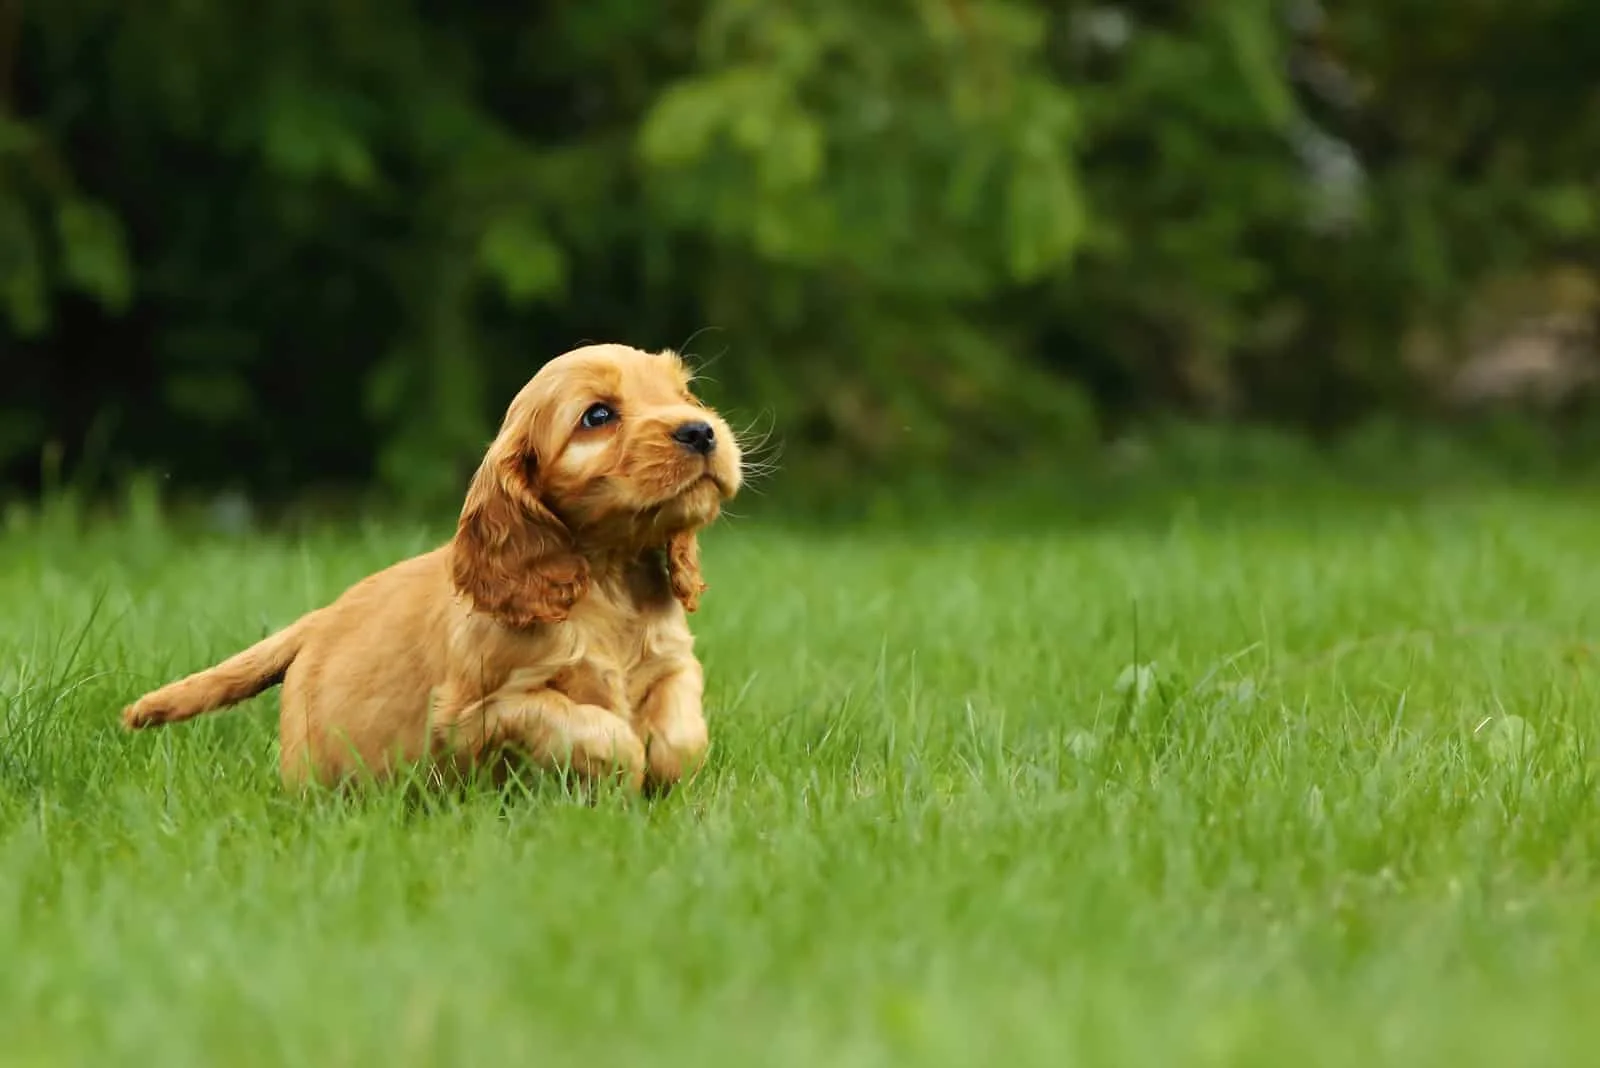 two month old cocker spaniel standing in grass